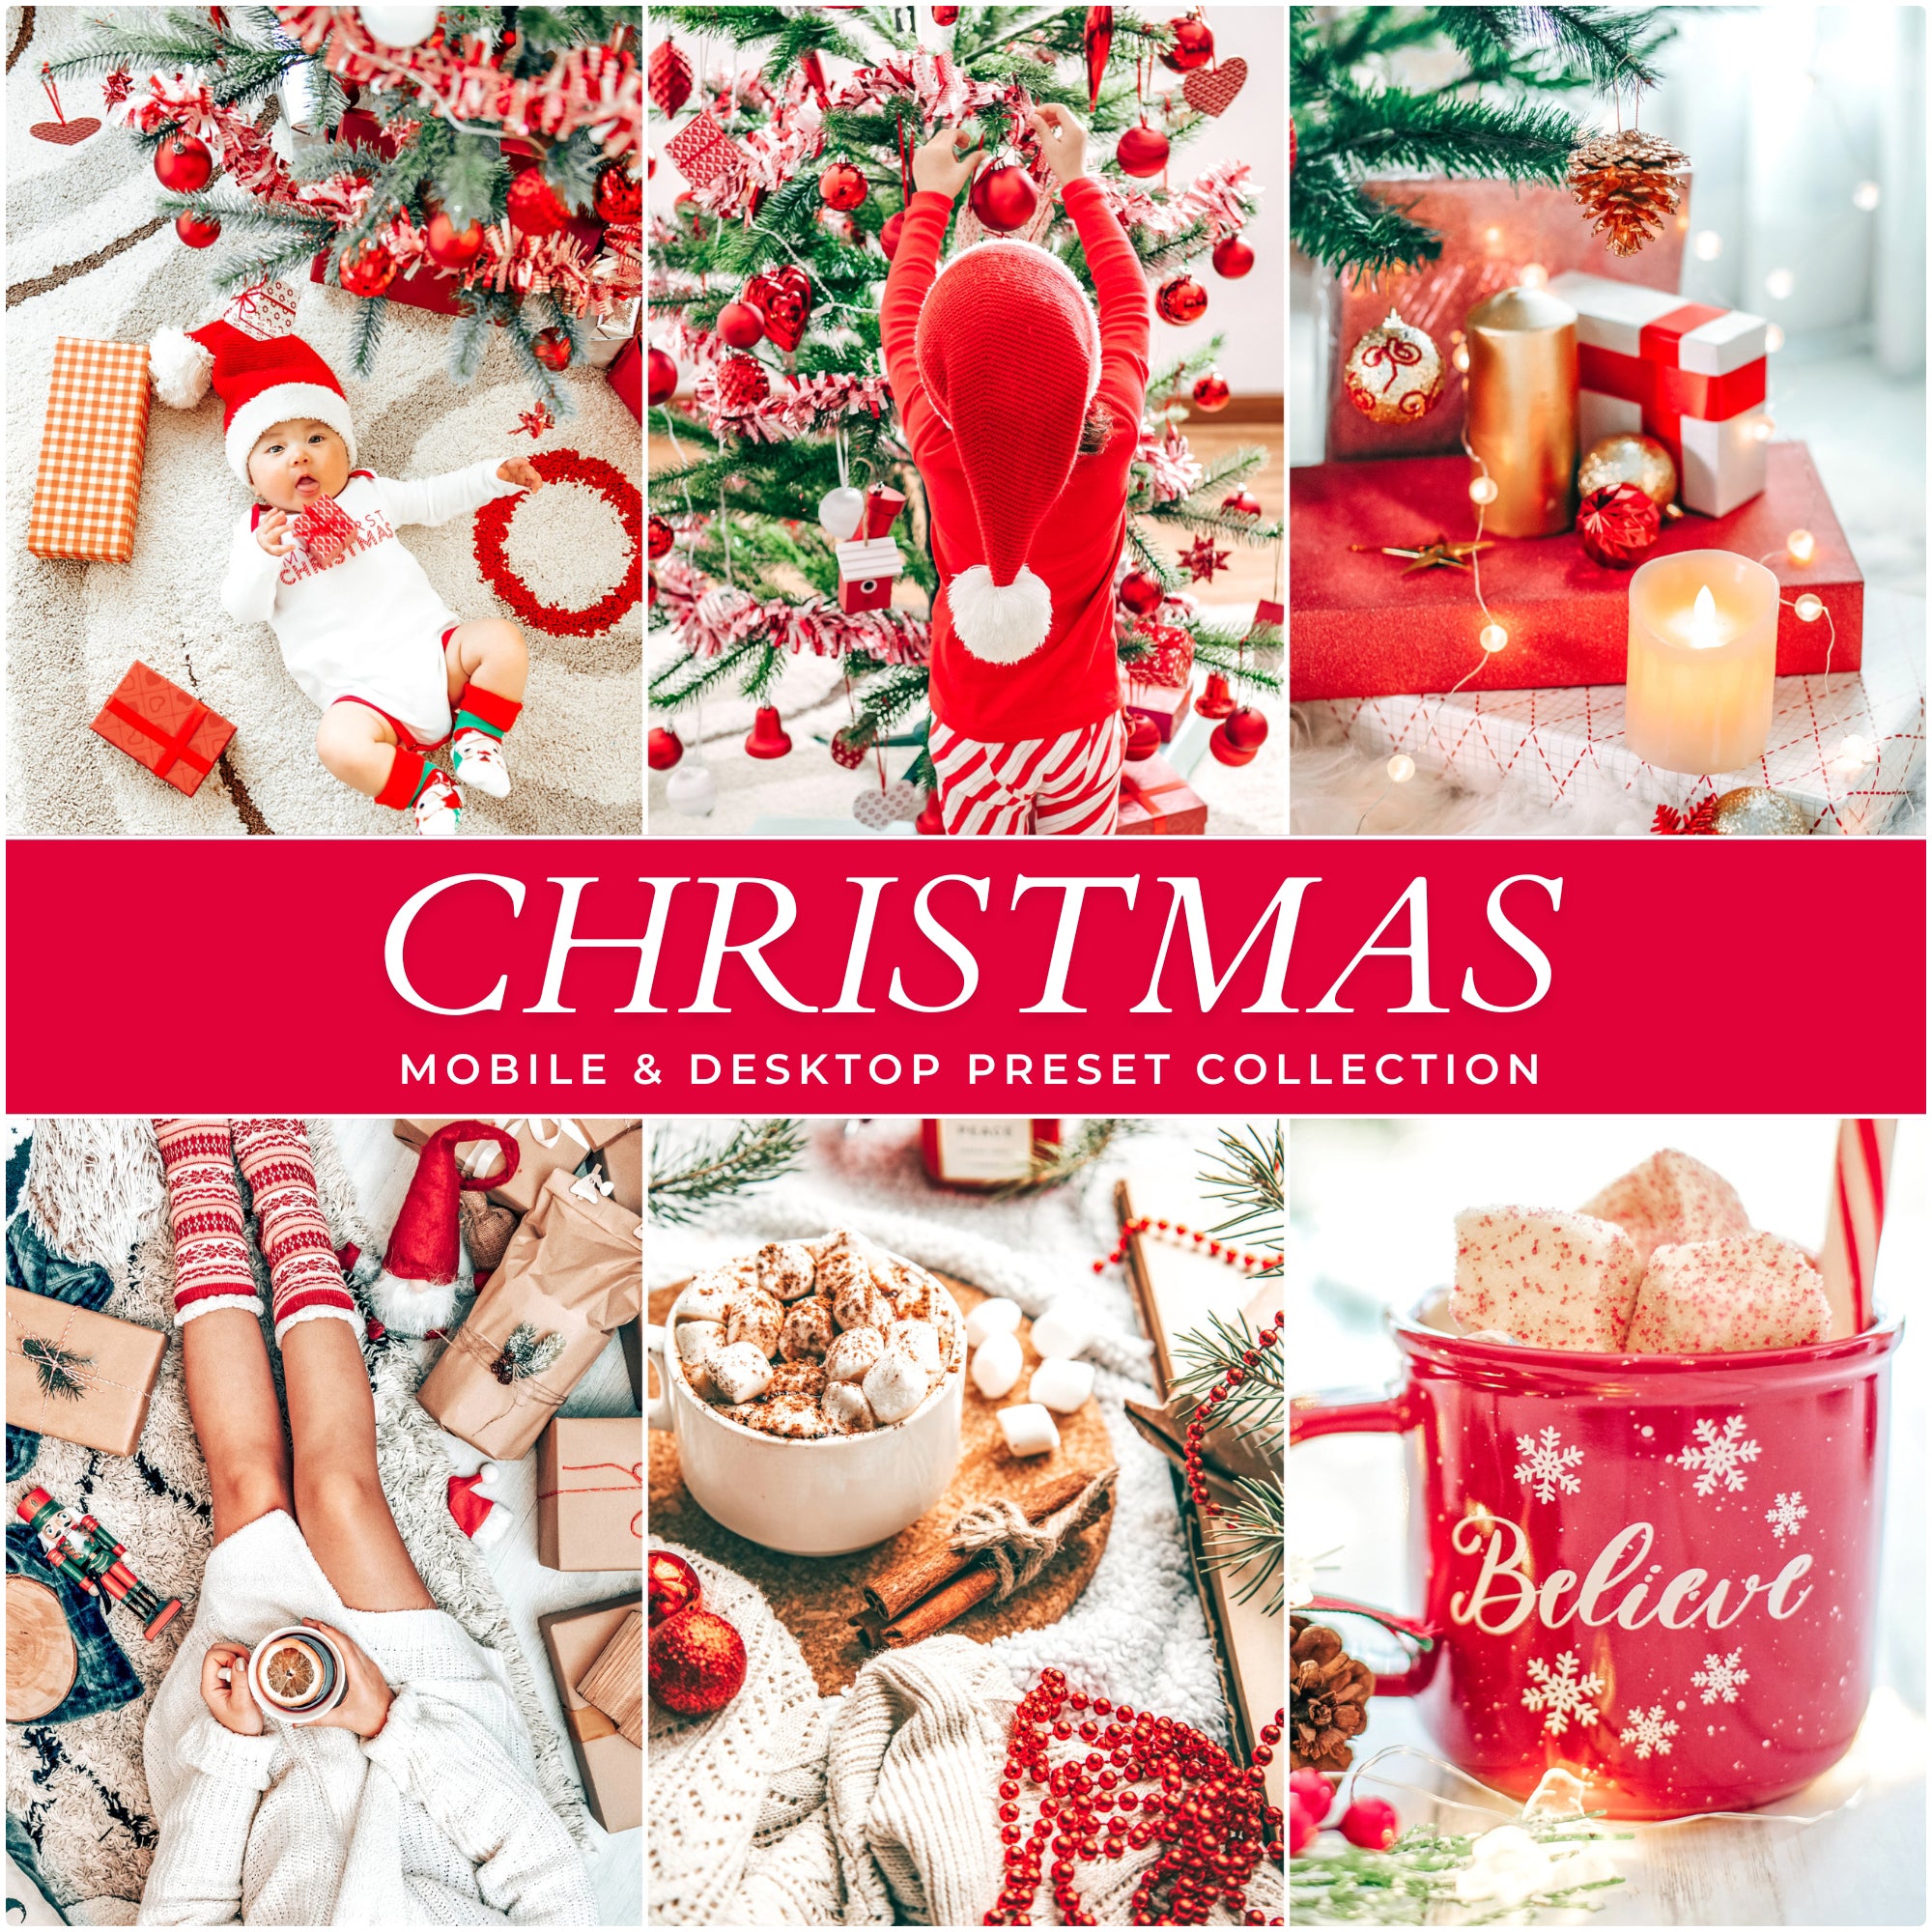 Top Christmas Lightroom Presets The Best Photo Editing Preset Filters For Christmas And Winter Holiday Photos with Adobe Lightroom Mobile And Desktop For Photographers and Instagram Influencers By Lou And Marks Presets